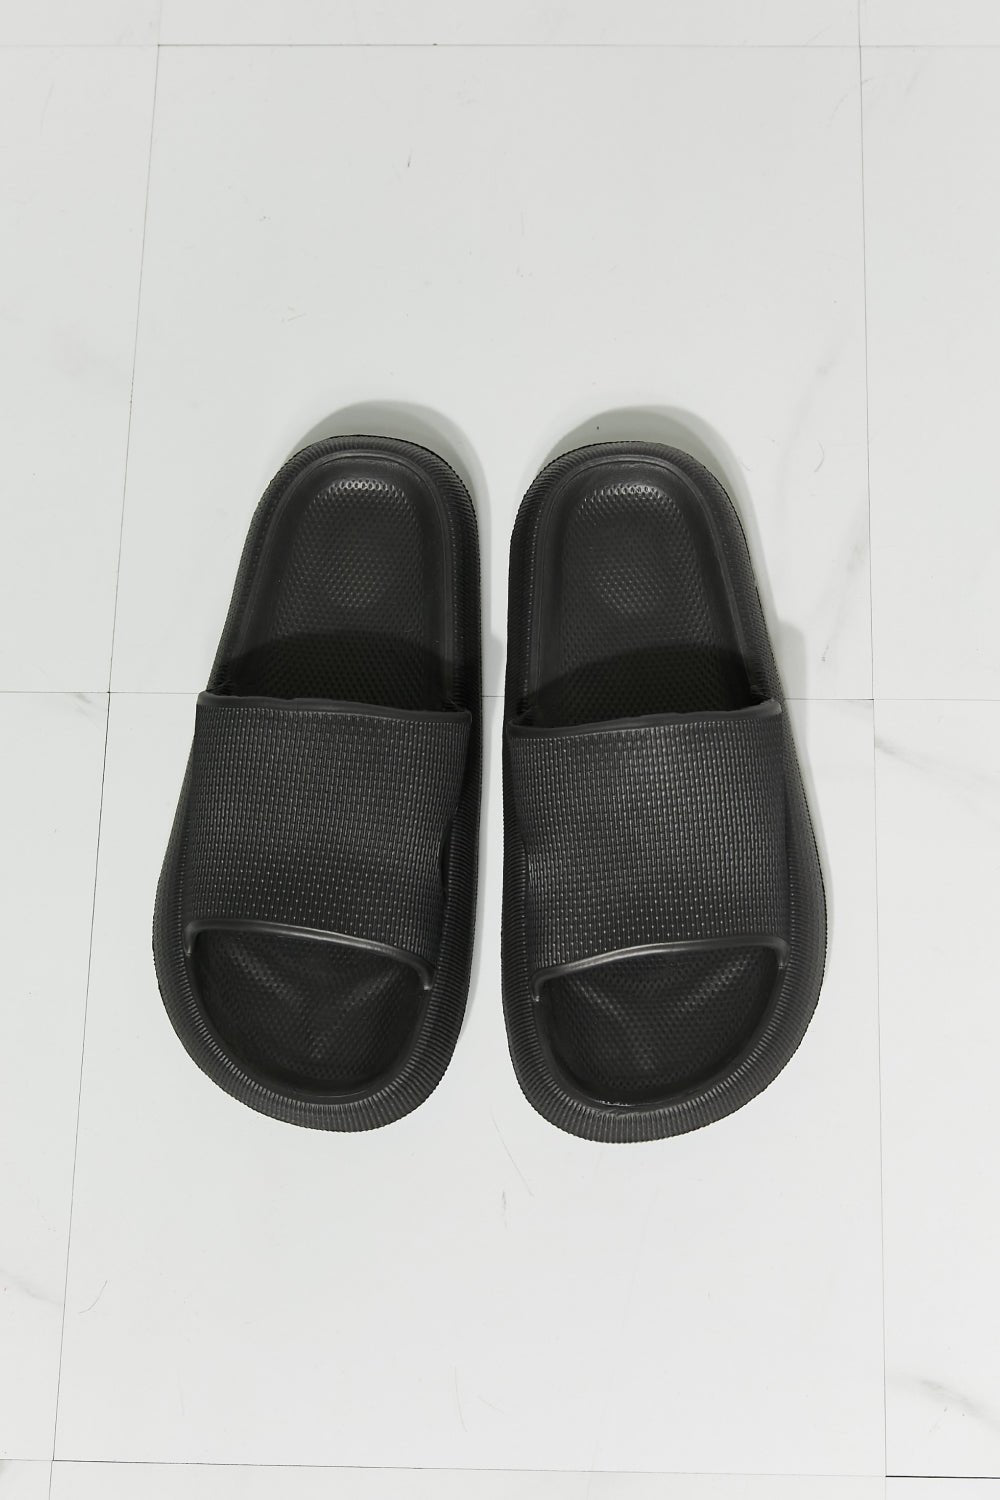 MMShoes Arms Around Me Open Toe Black Slide - EMMY